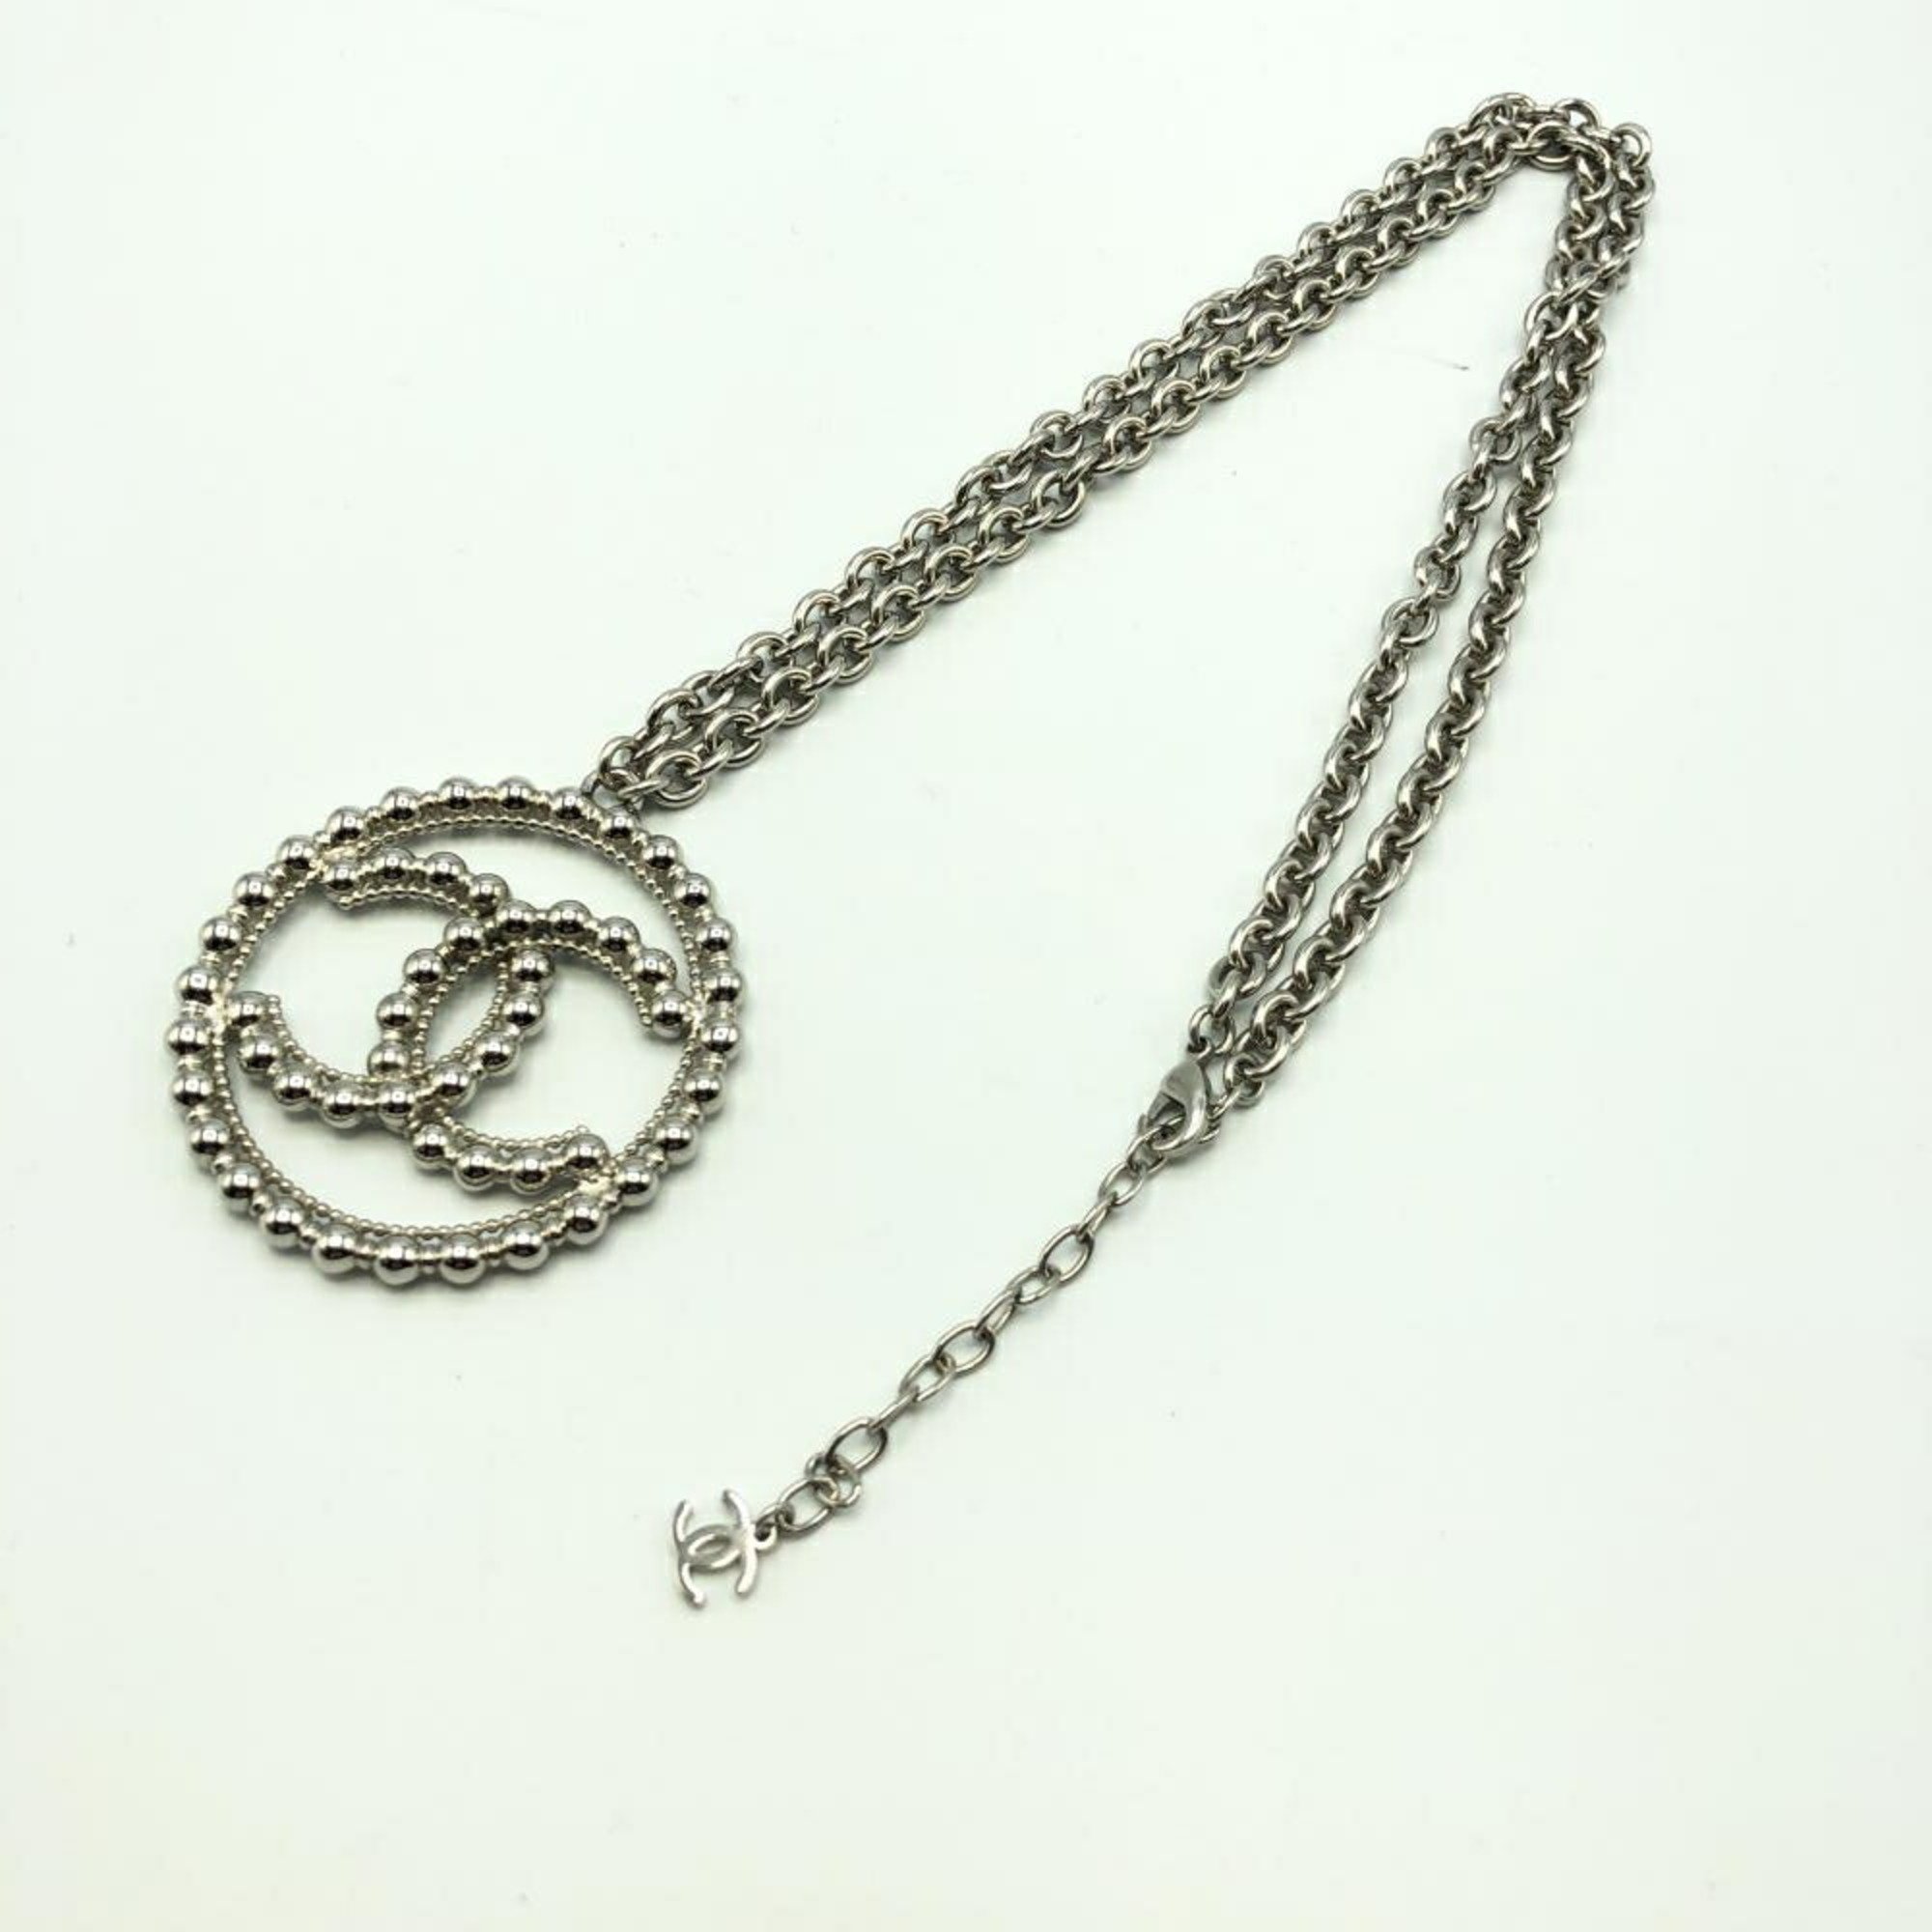 CHANEL 22 Year Cruise Collection Coco Mark Metallic Necklace L22 C